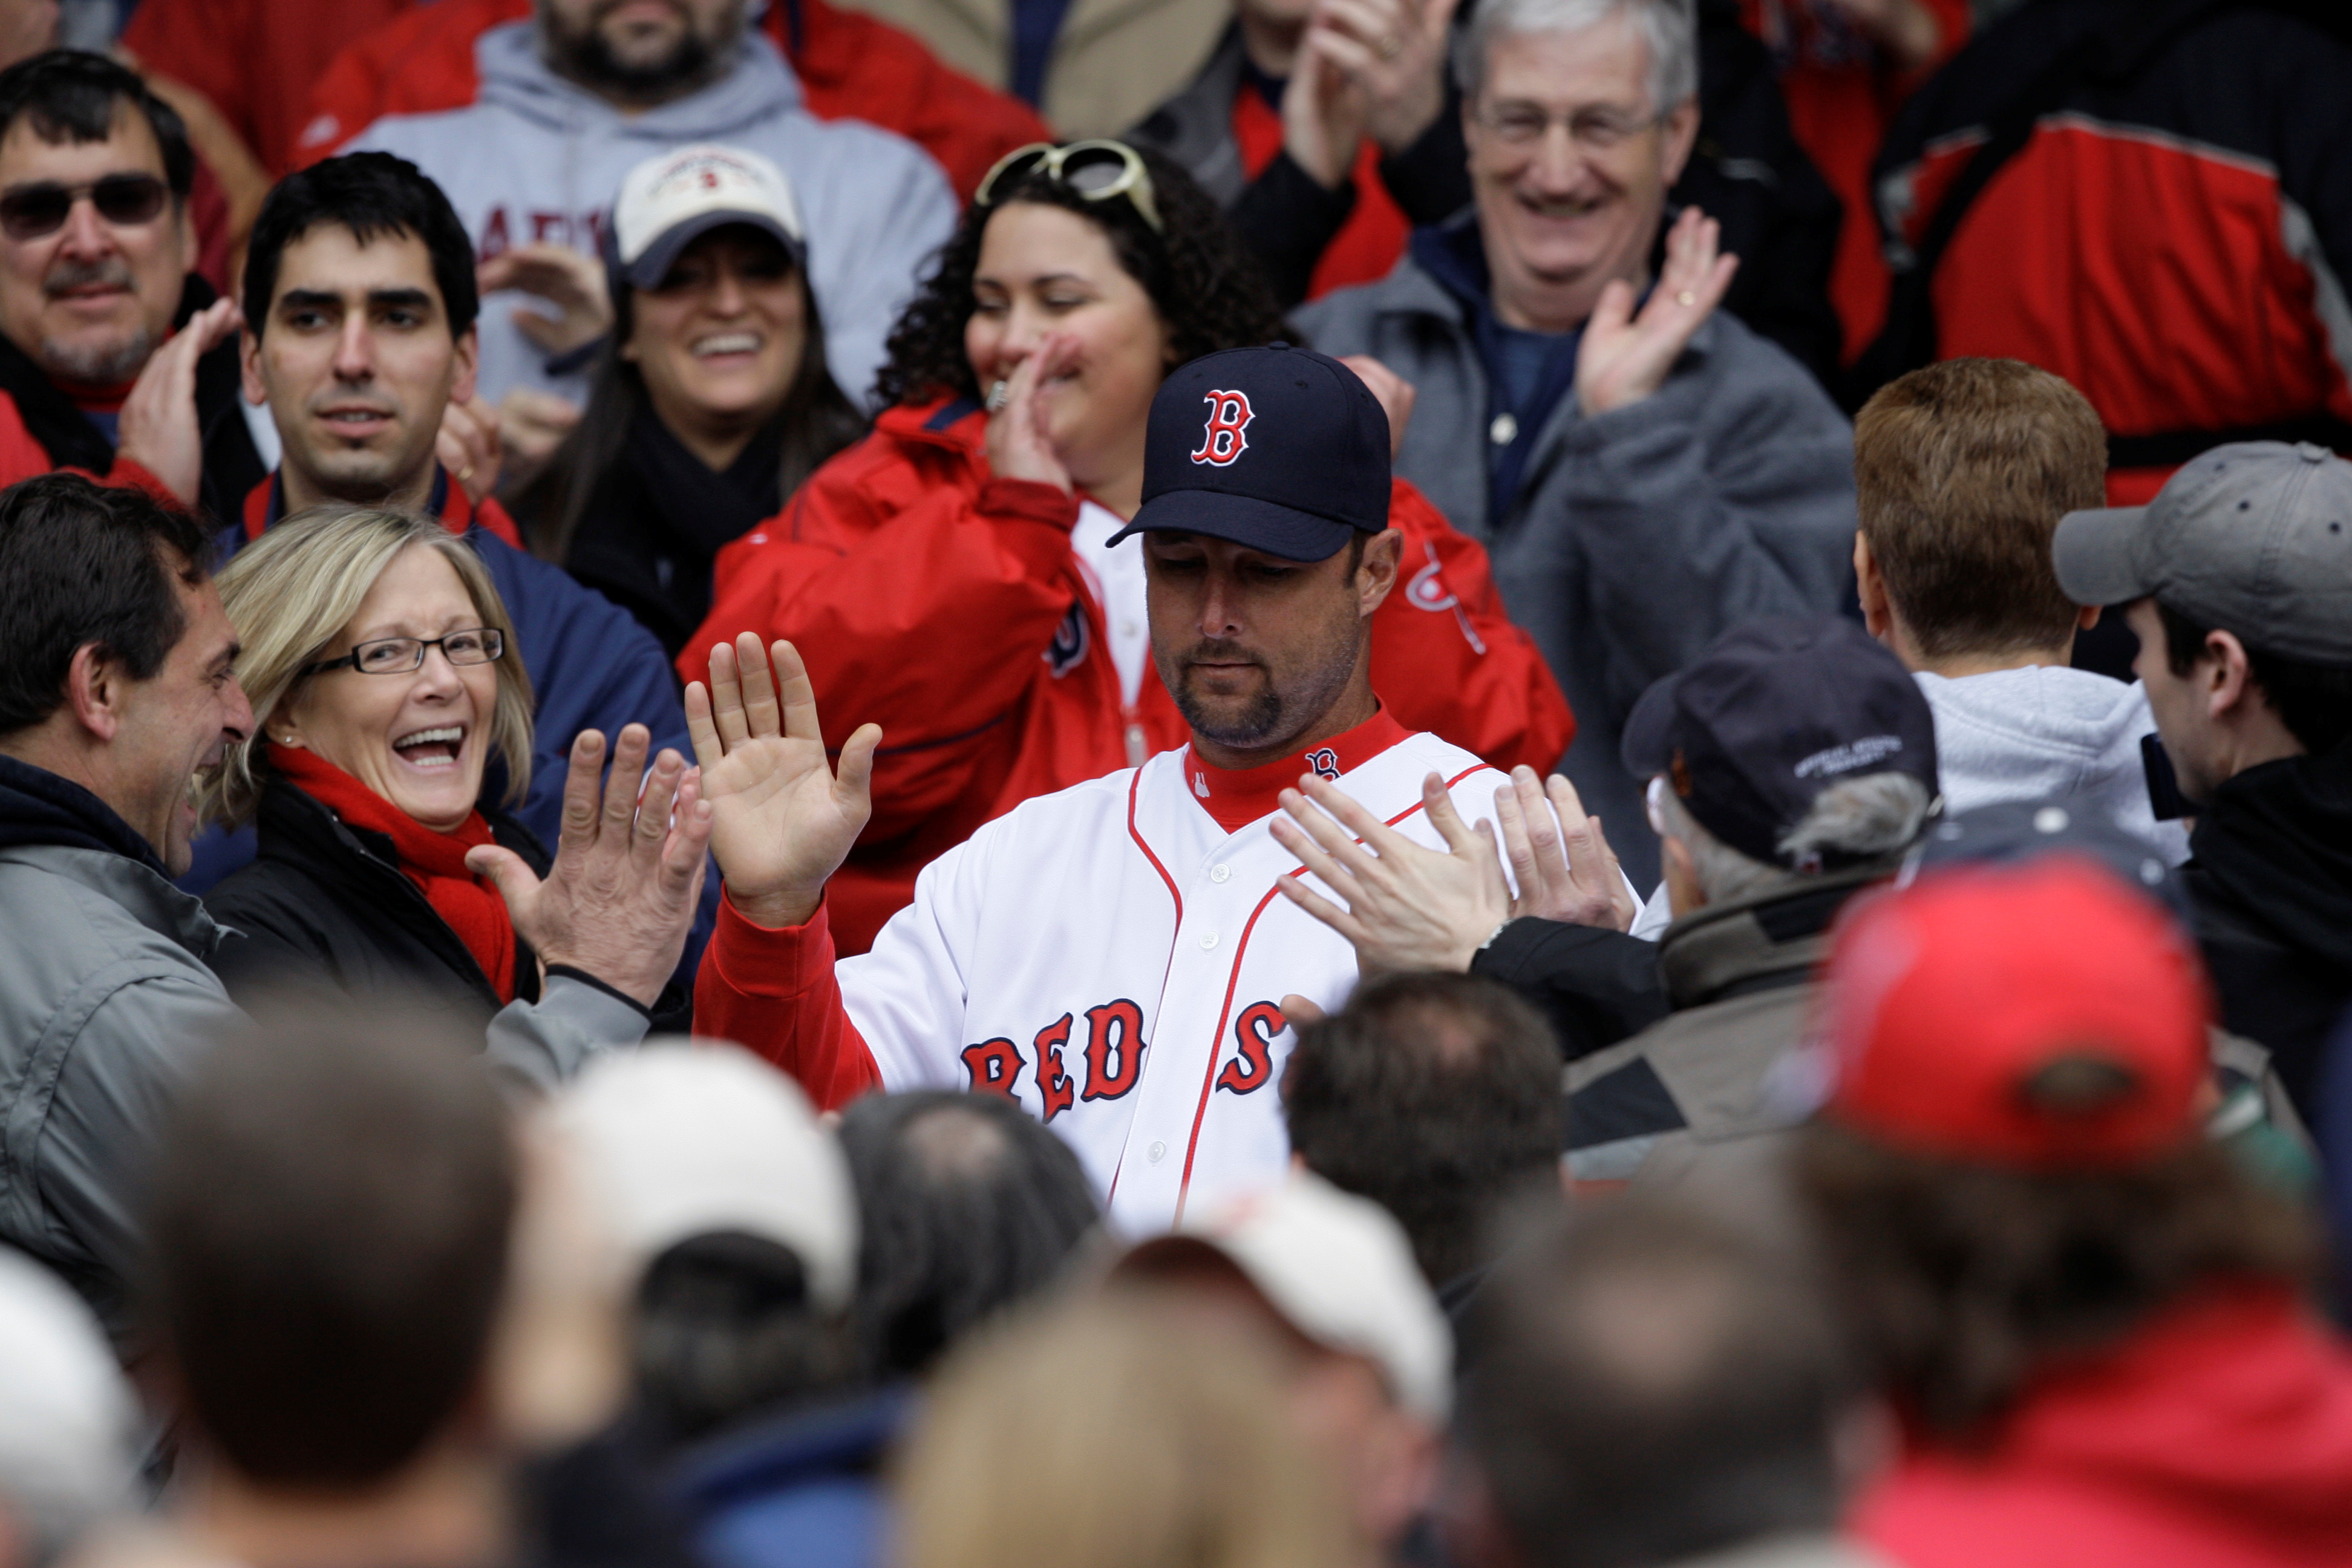 Ex-Red Sox pitcher Tim Wakefield, who served up historic Yankees HR, dies  at 57 